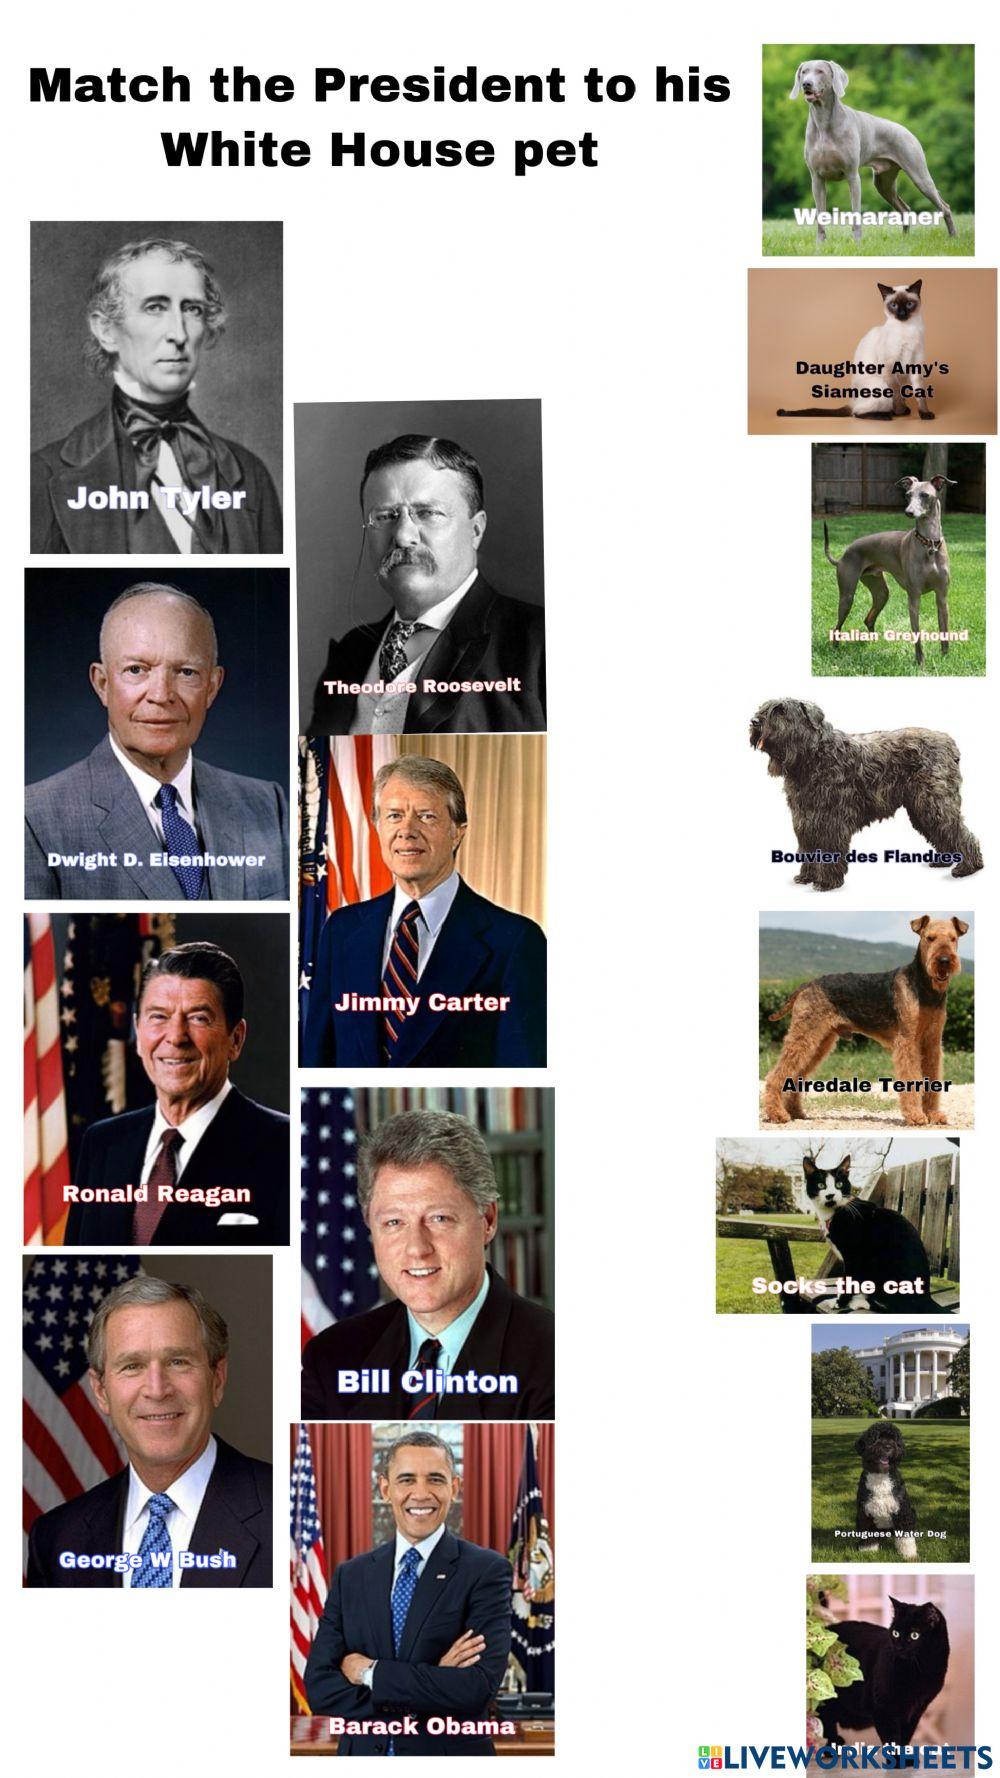 Match the President to his pet